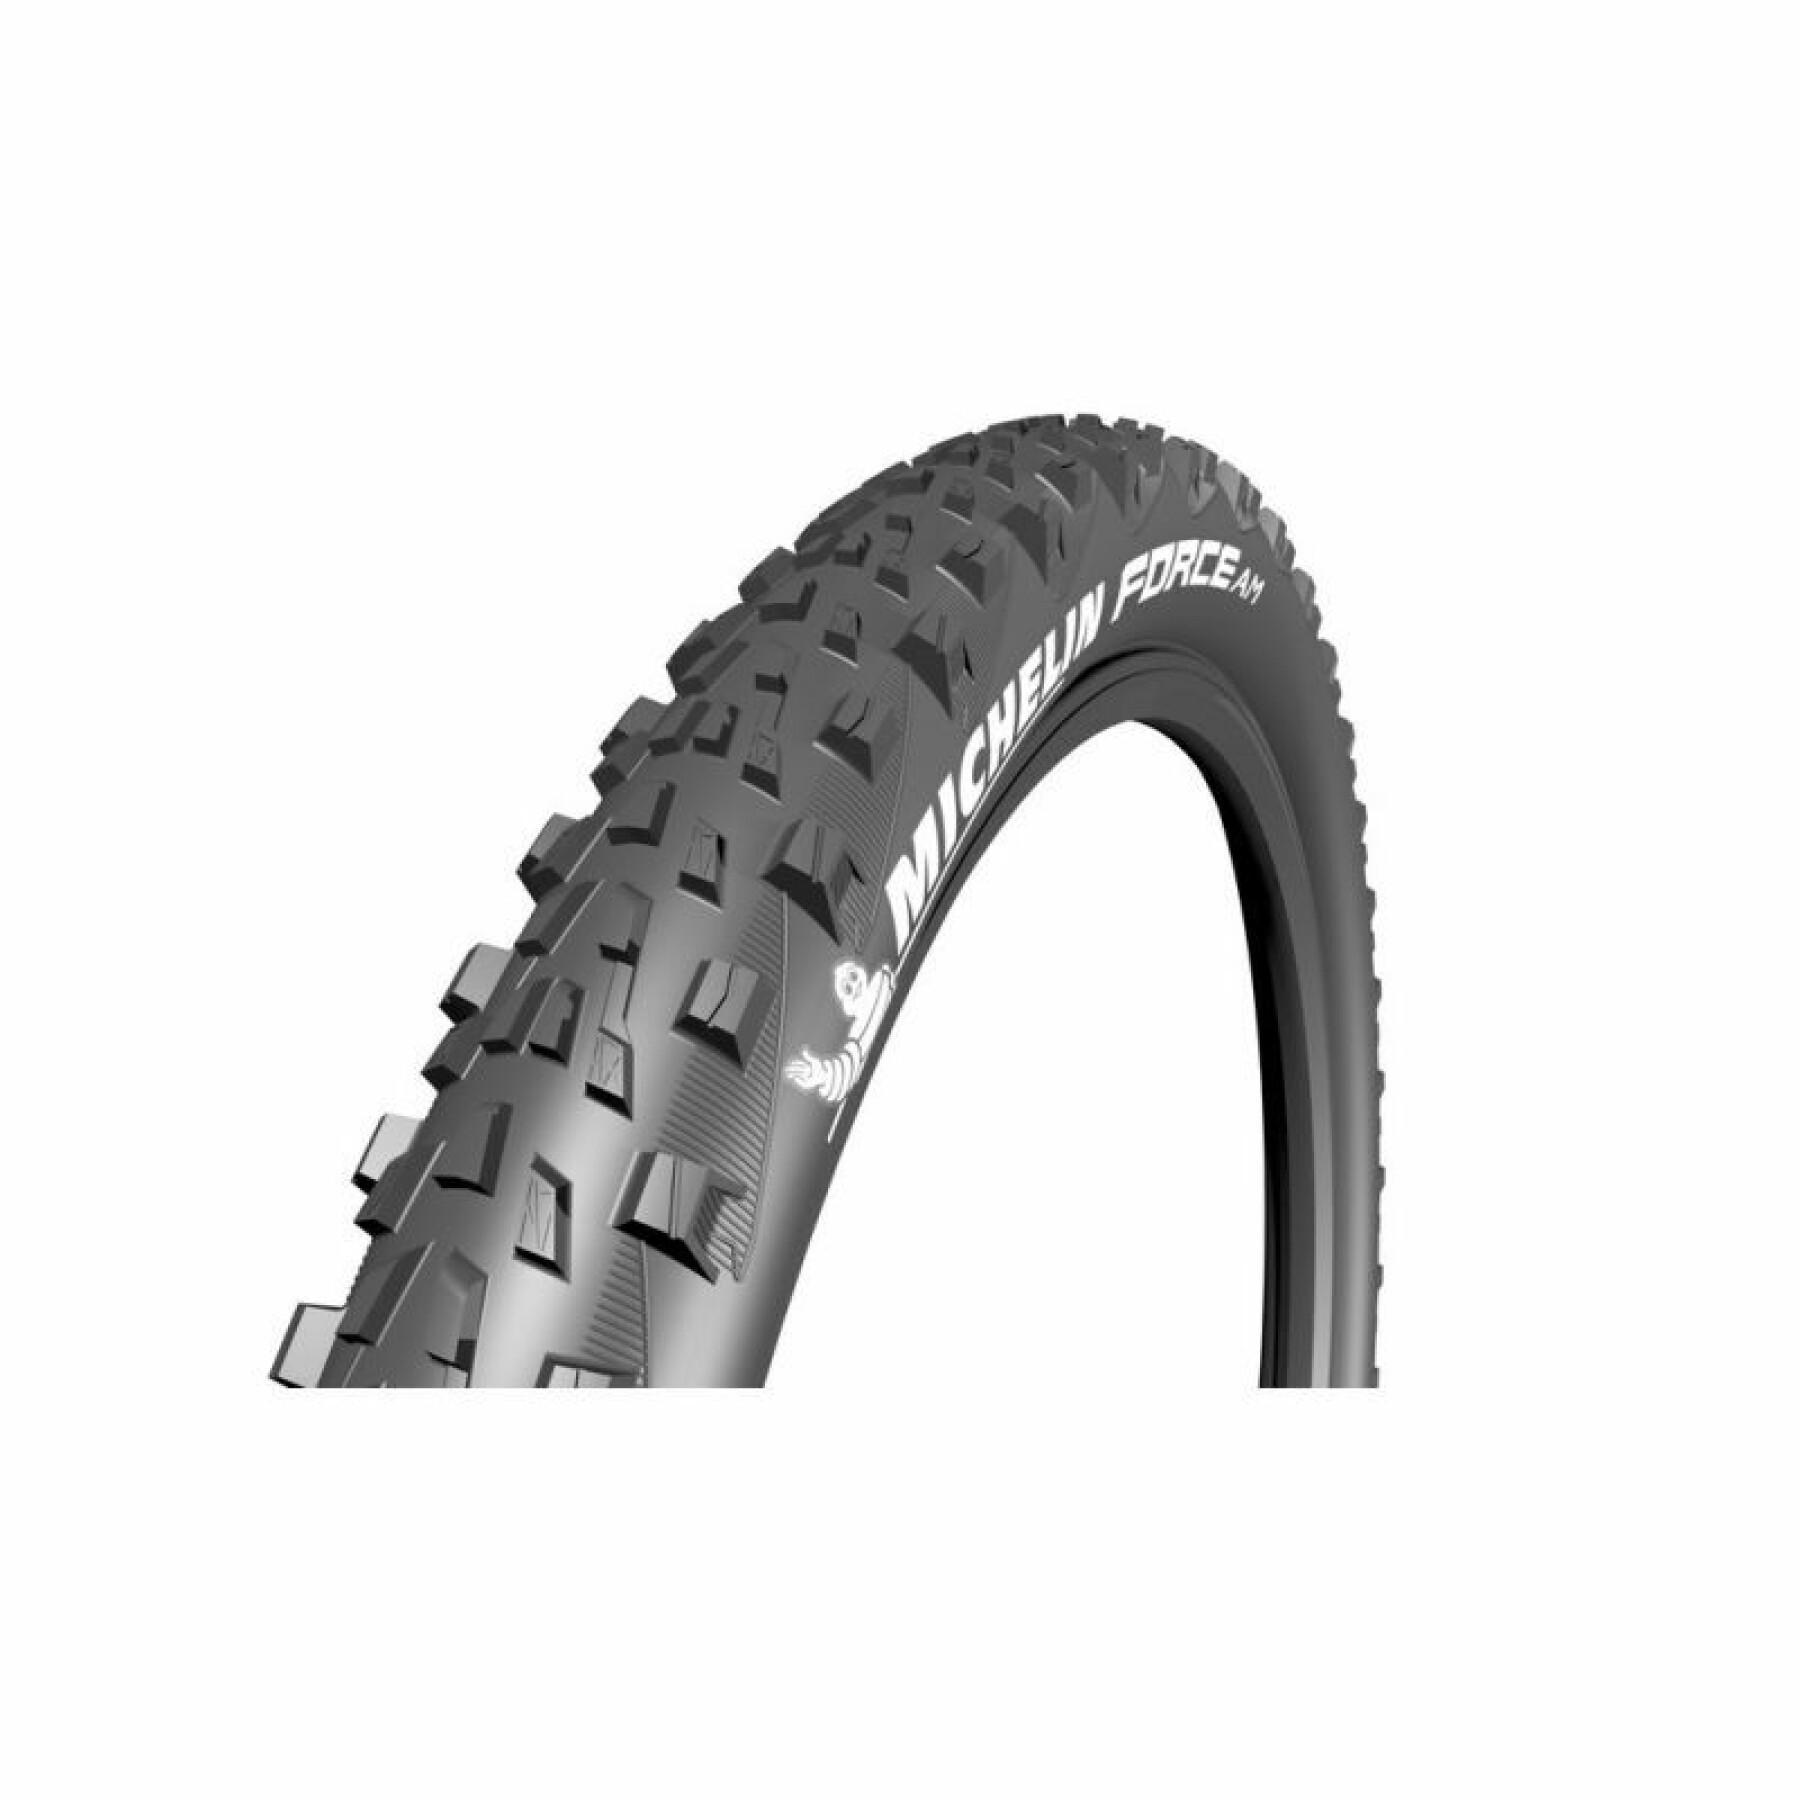 Soft tire Michelin Competition Force AM tubeless Ready lin Competitione 71-584 27.5 x 2.80